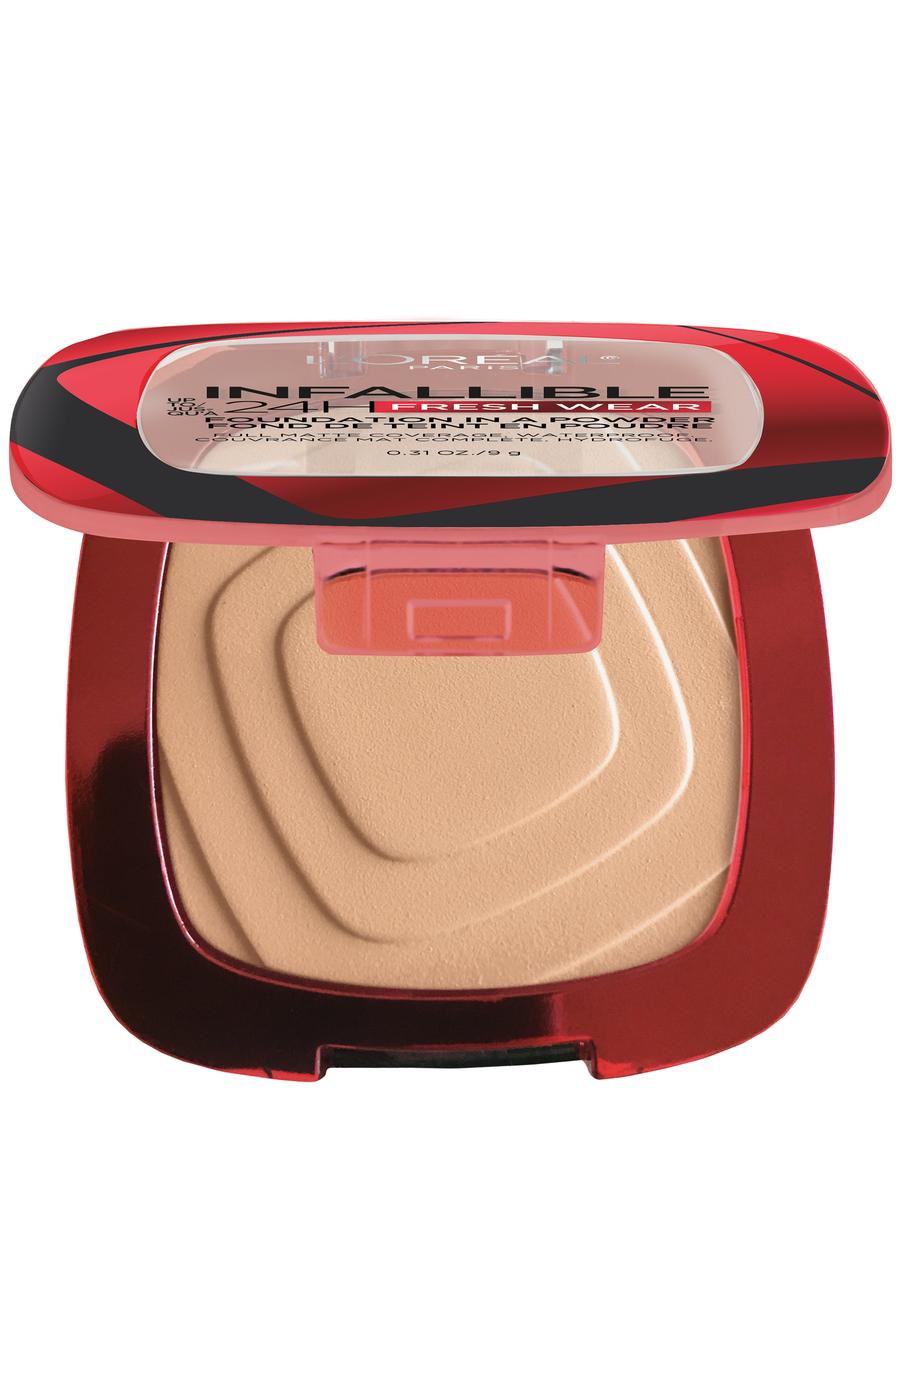 L'Oréal Paris Infallible Up to 24H Fresh Wear Foundation in a Powder Sand; image 2 of 4